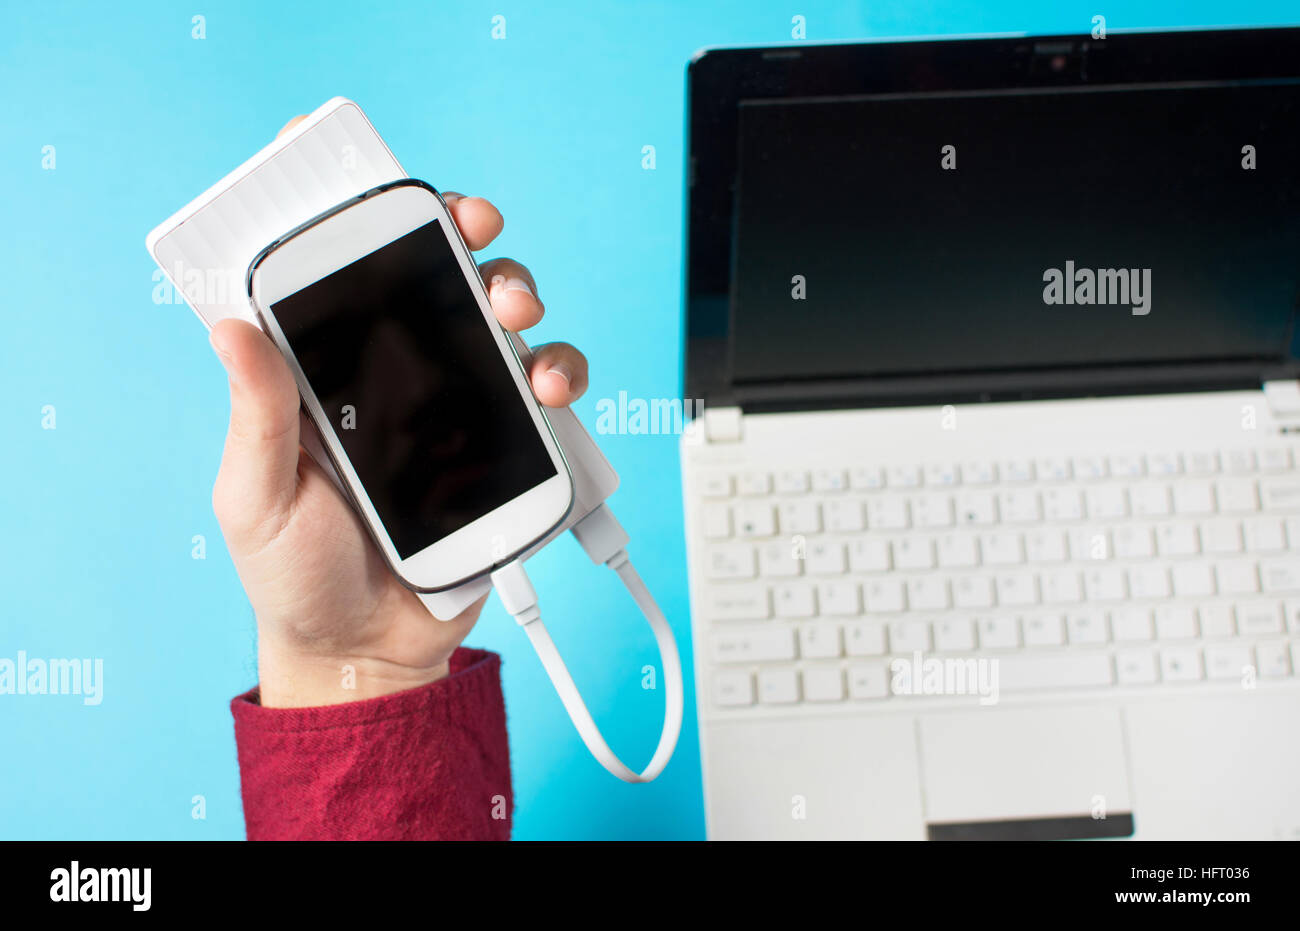 male hands holding a white cellphone connected to a power bank on blue Stock Photo